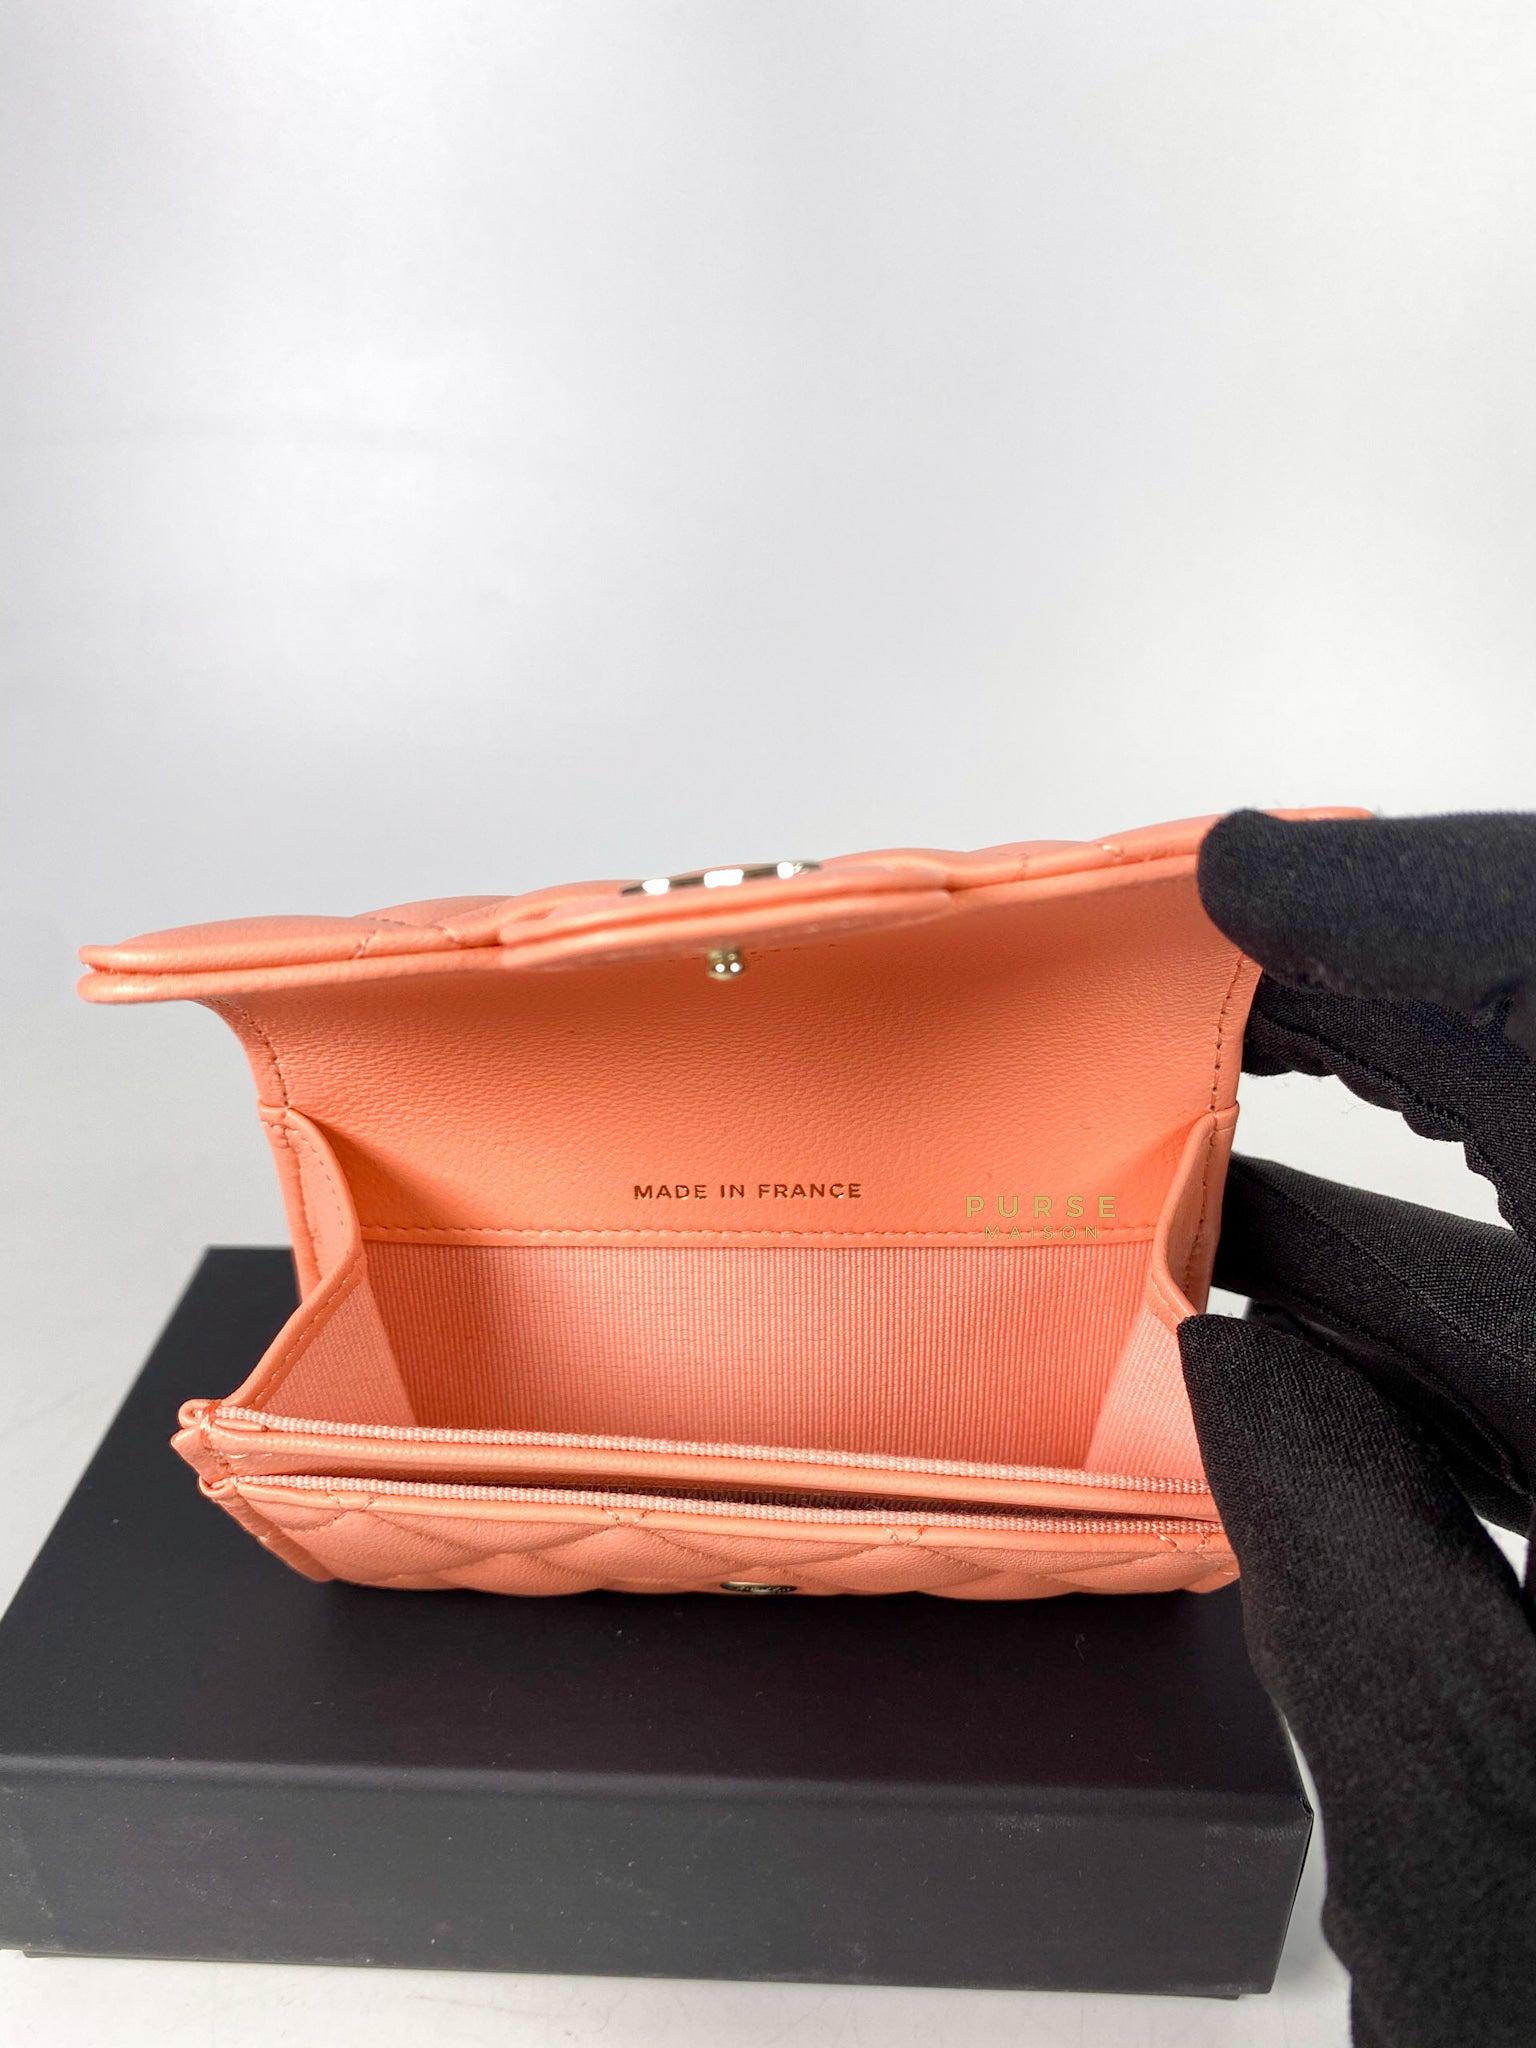 Chanel Classic Cardholder Salmon Pink Lambskin and Light Gold Hardware (Microchip)